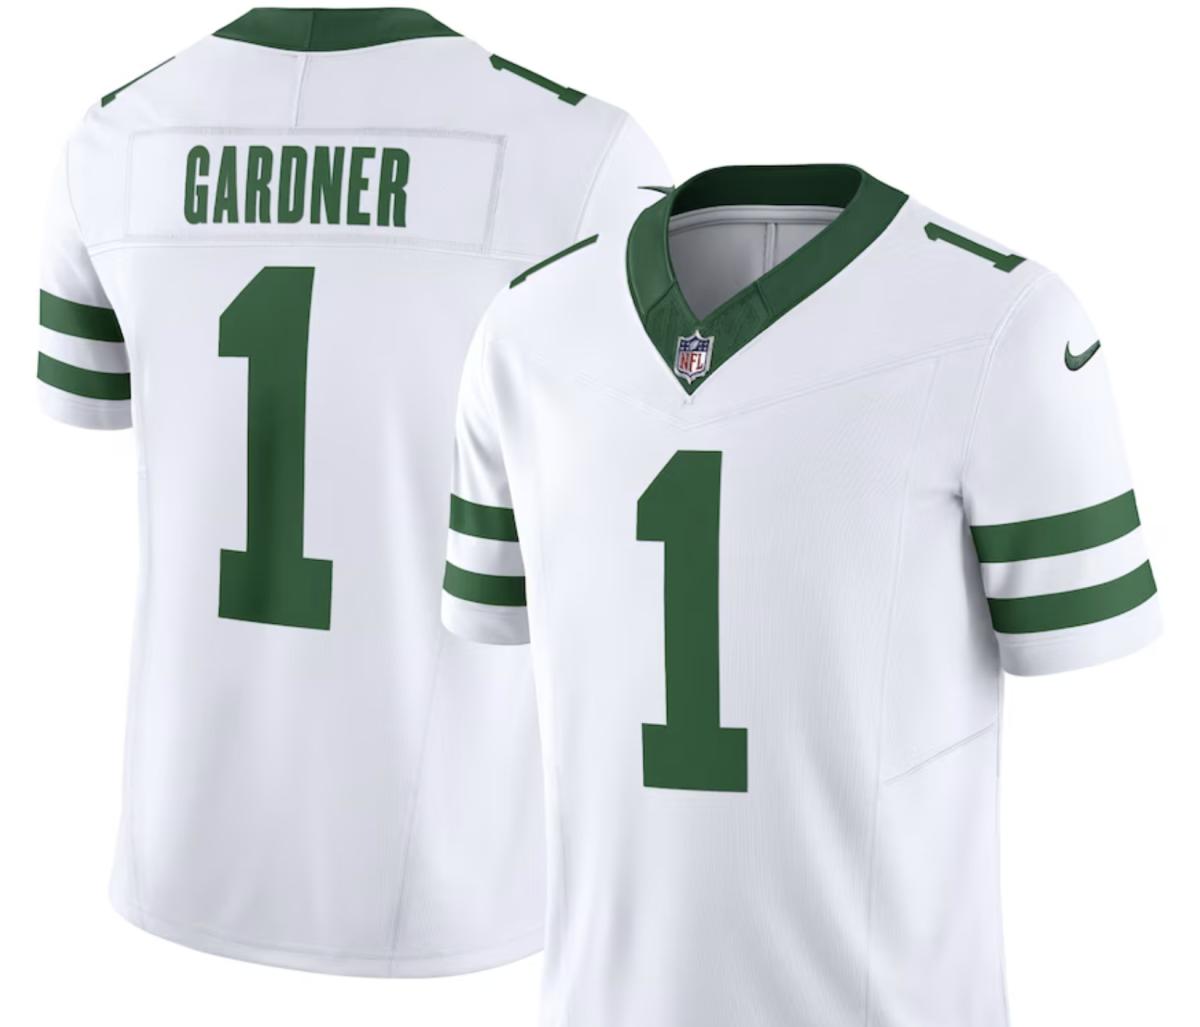 Order your New York Jets throwback gear now